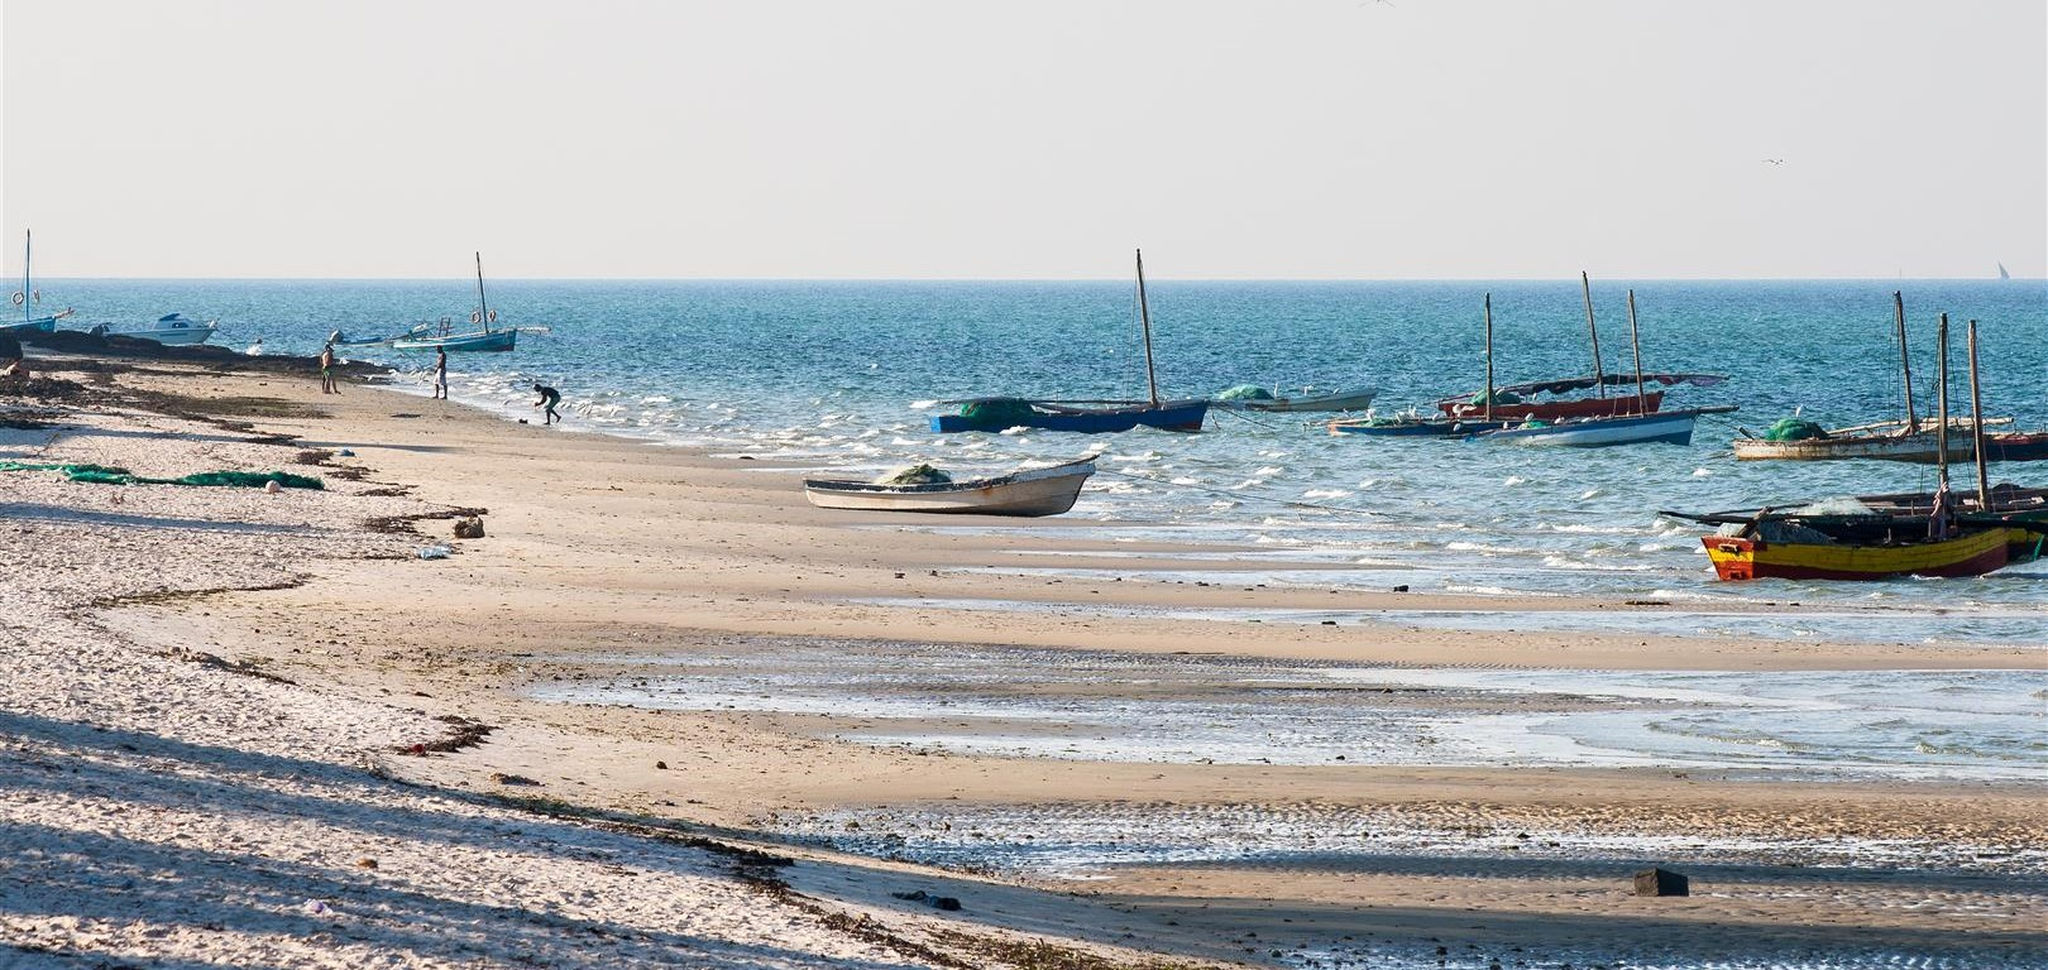 Mozambique beach filled with dhows and locals at Vilanculos